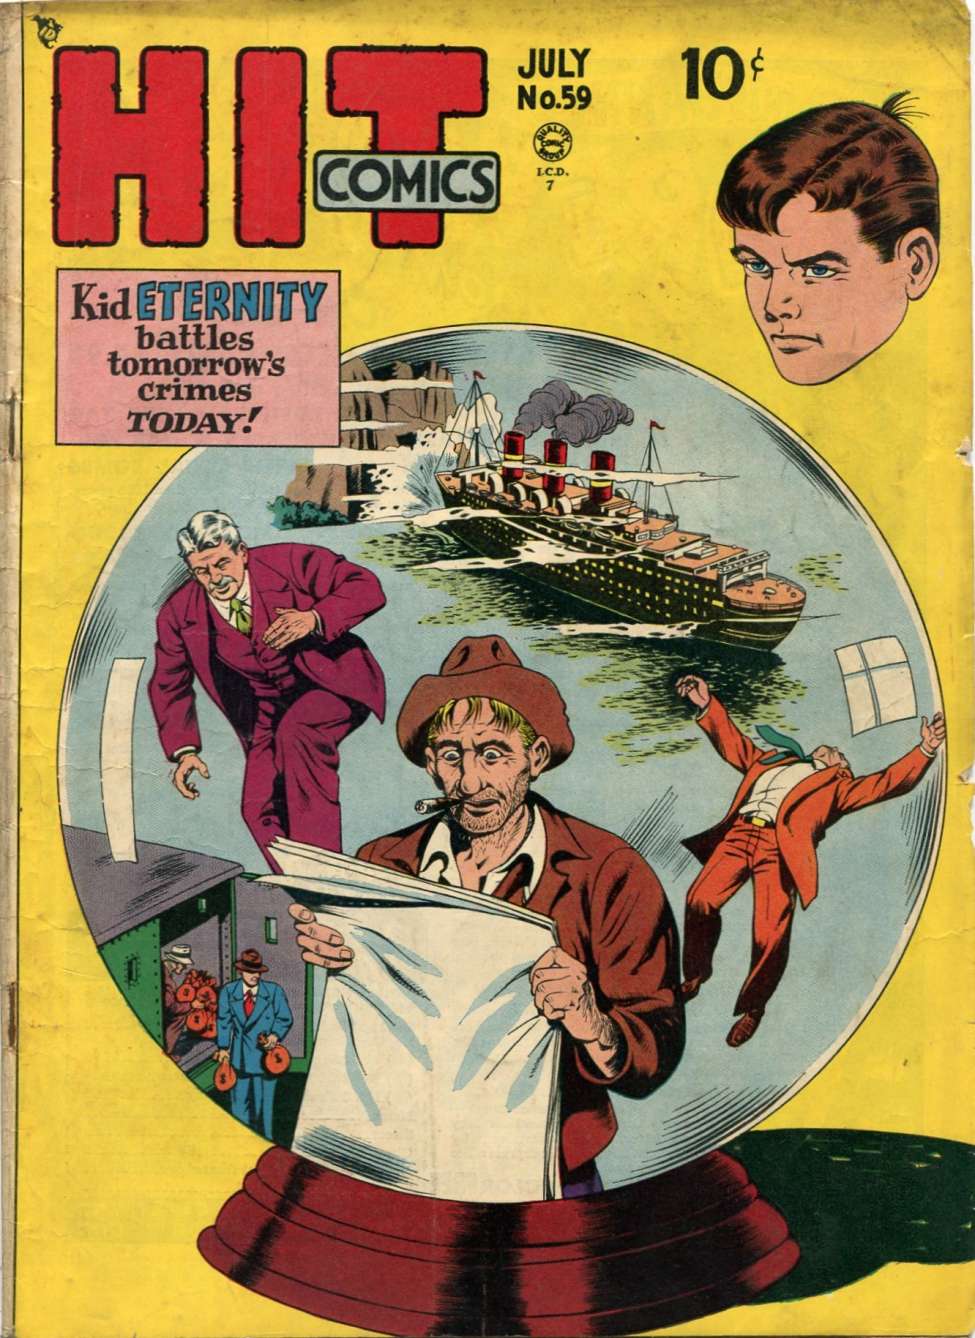 Book Cover For Hit Comics 59